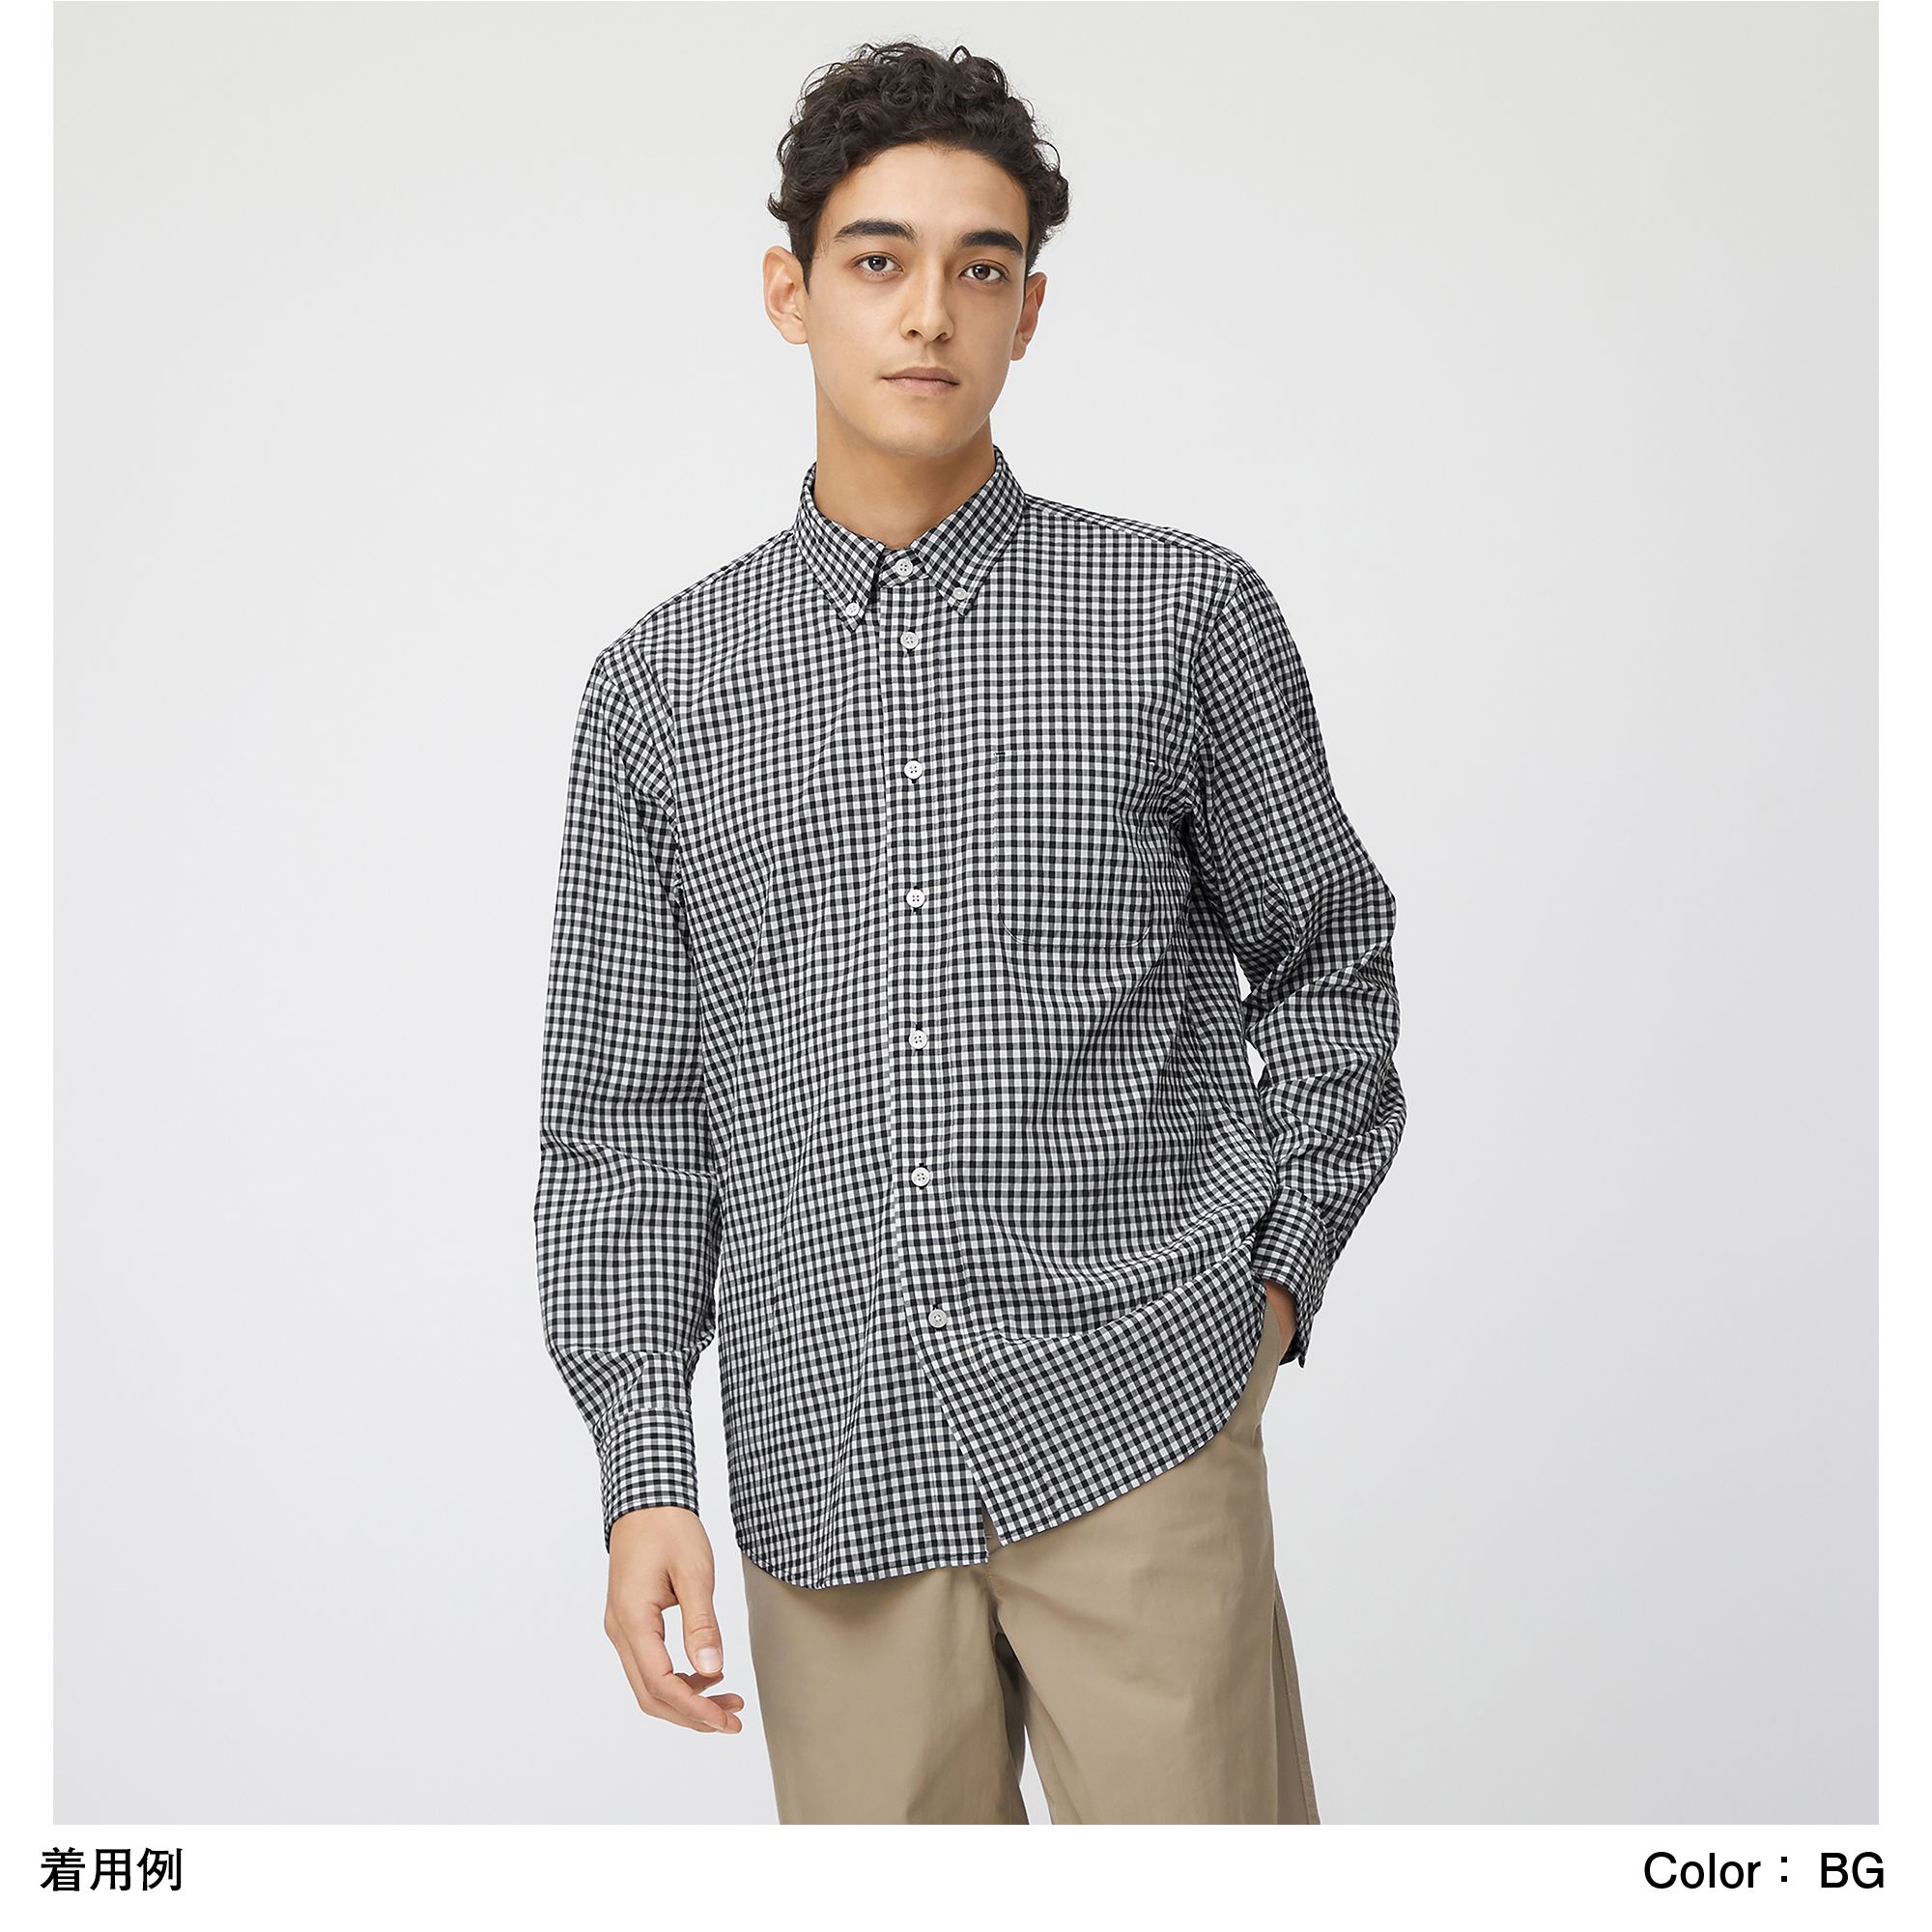 2022A/W新作送料無料 NEW THE NORTH FACE ザ ノースフェイス ロングスリーブヒデンバリーシャツ メンズ L S Hidden Valley Shirt NR11966 KN